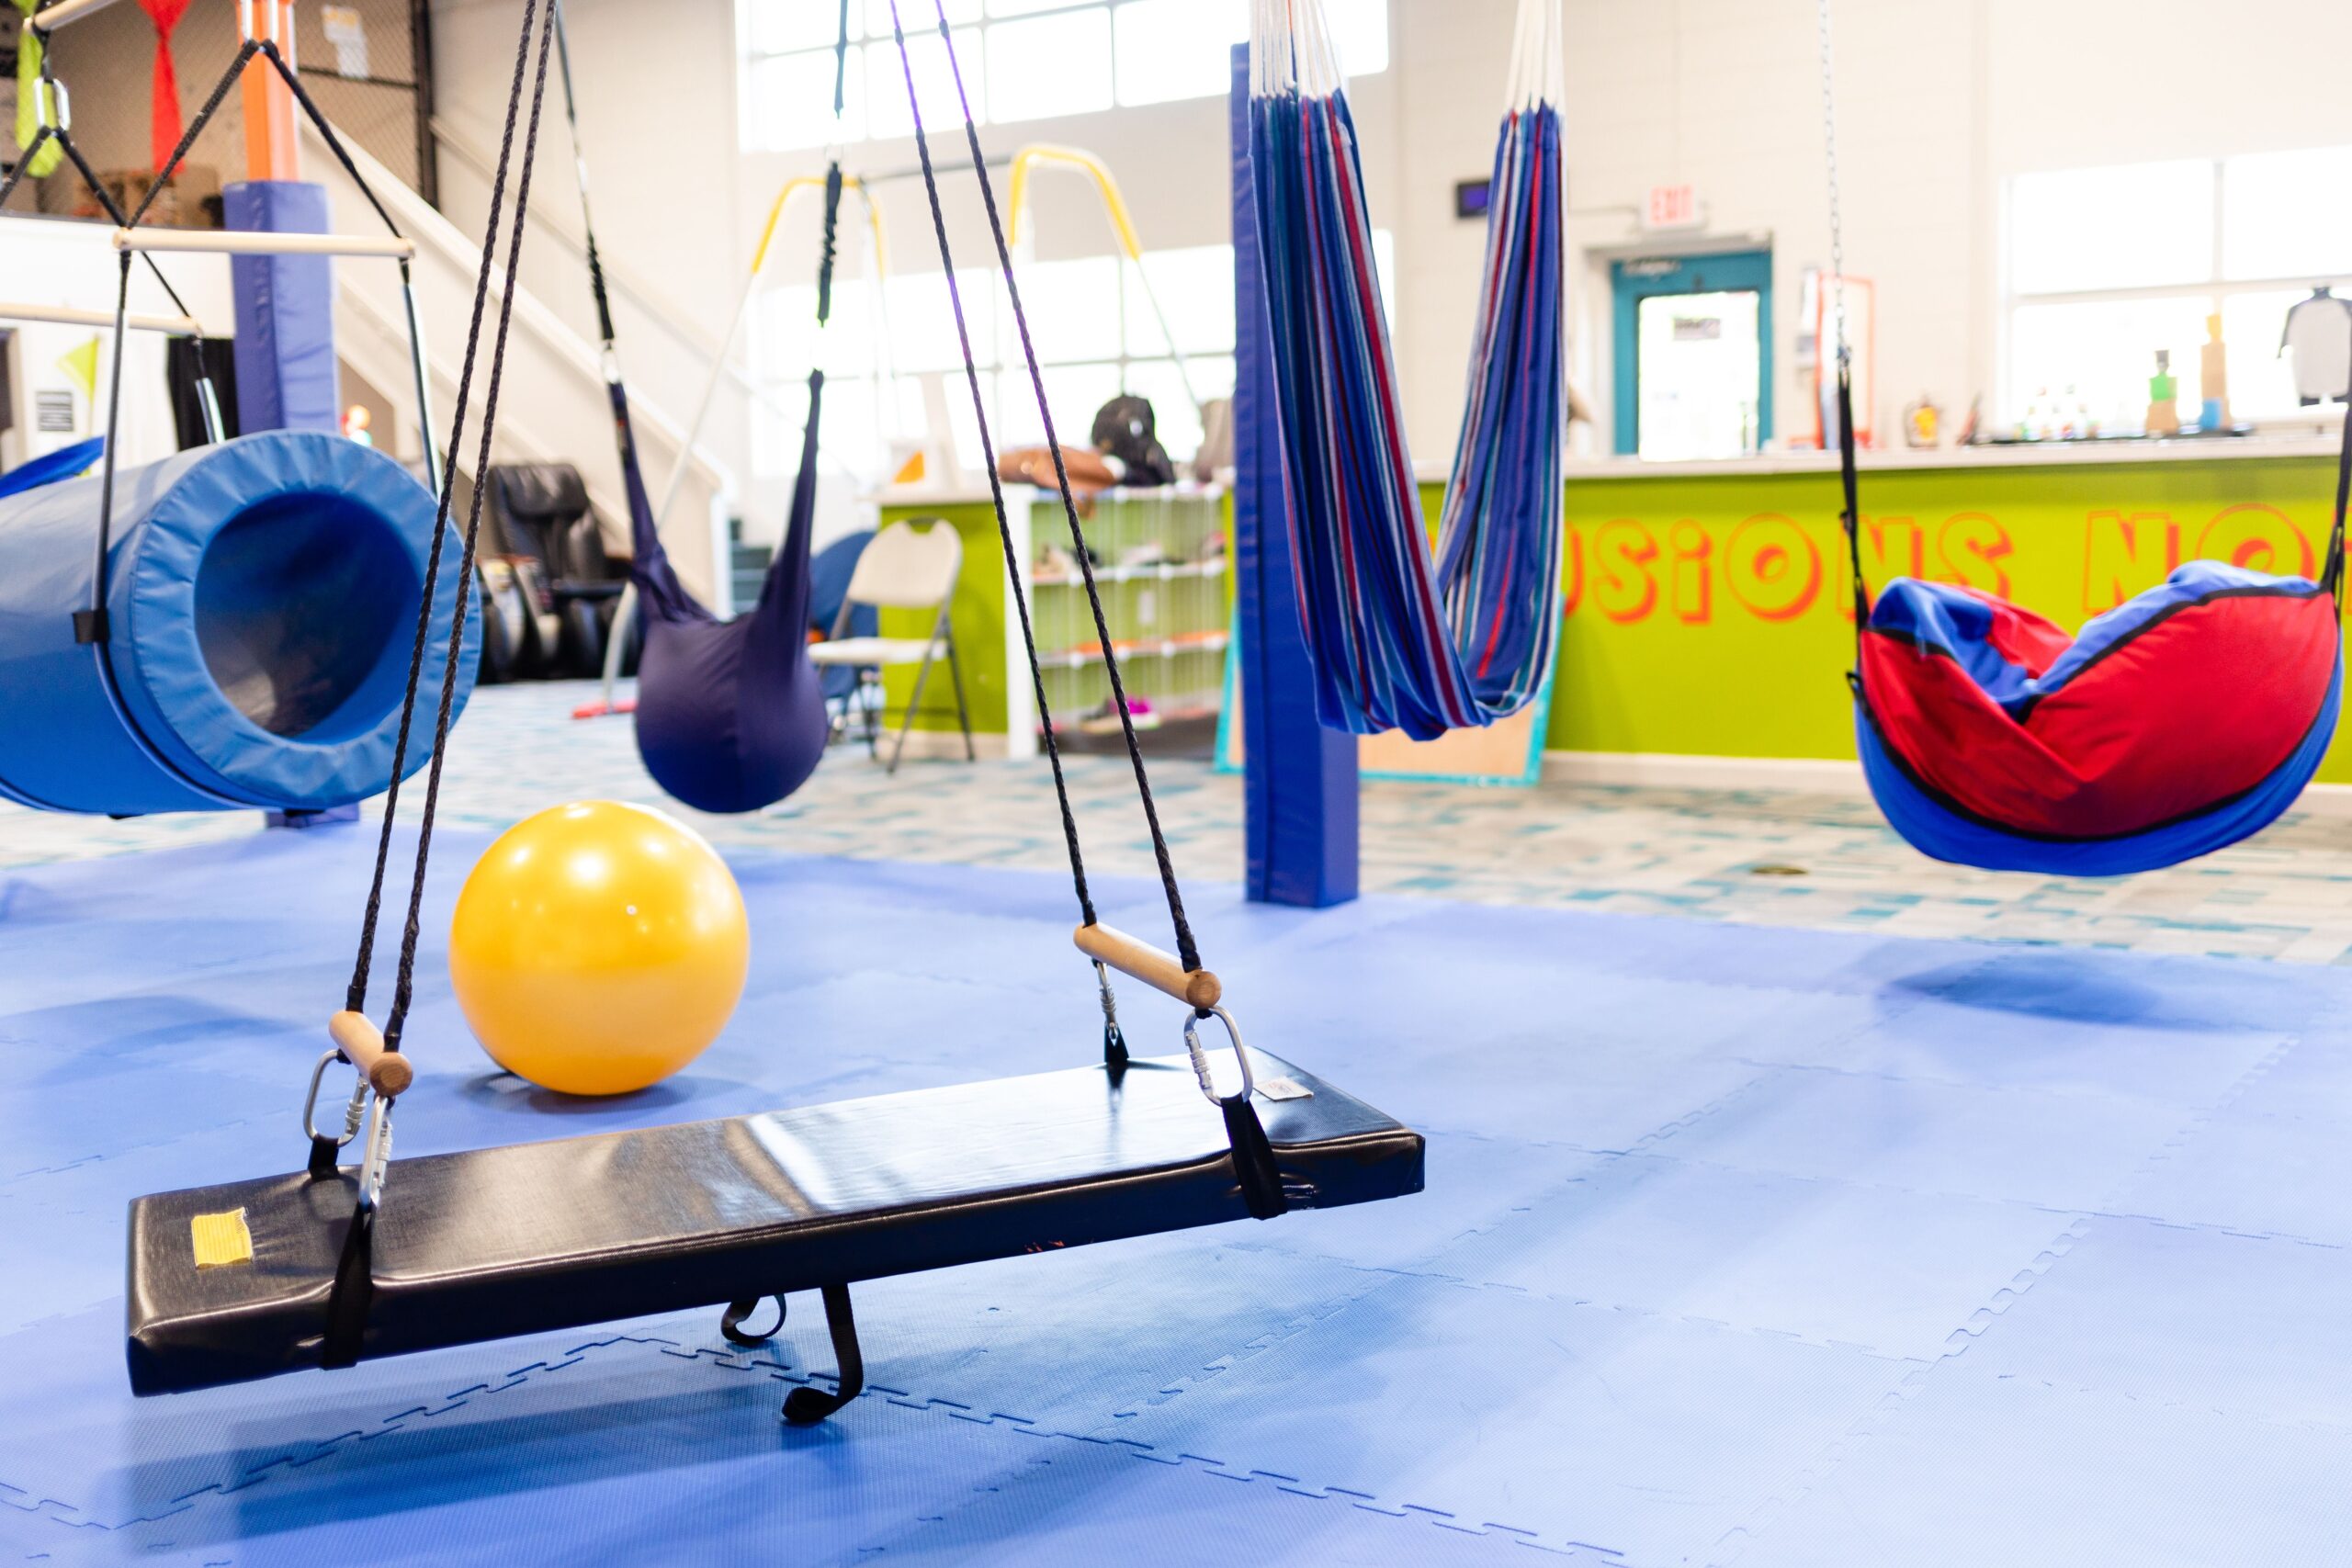 In the middle of the Q's Corner gym is a wide variety of swings for kids to enjoy.